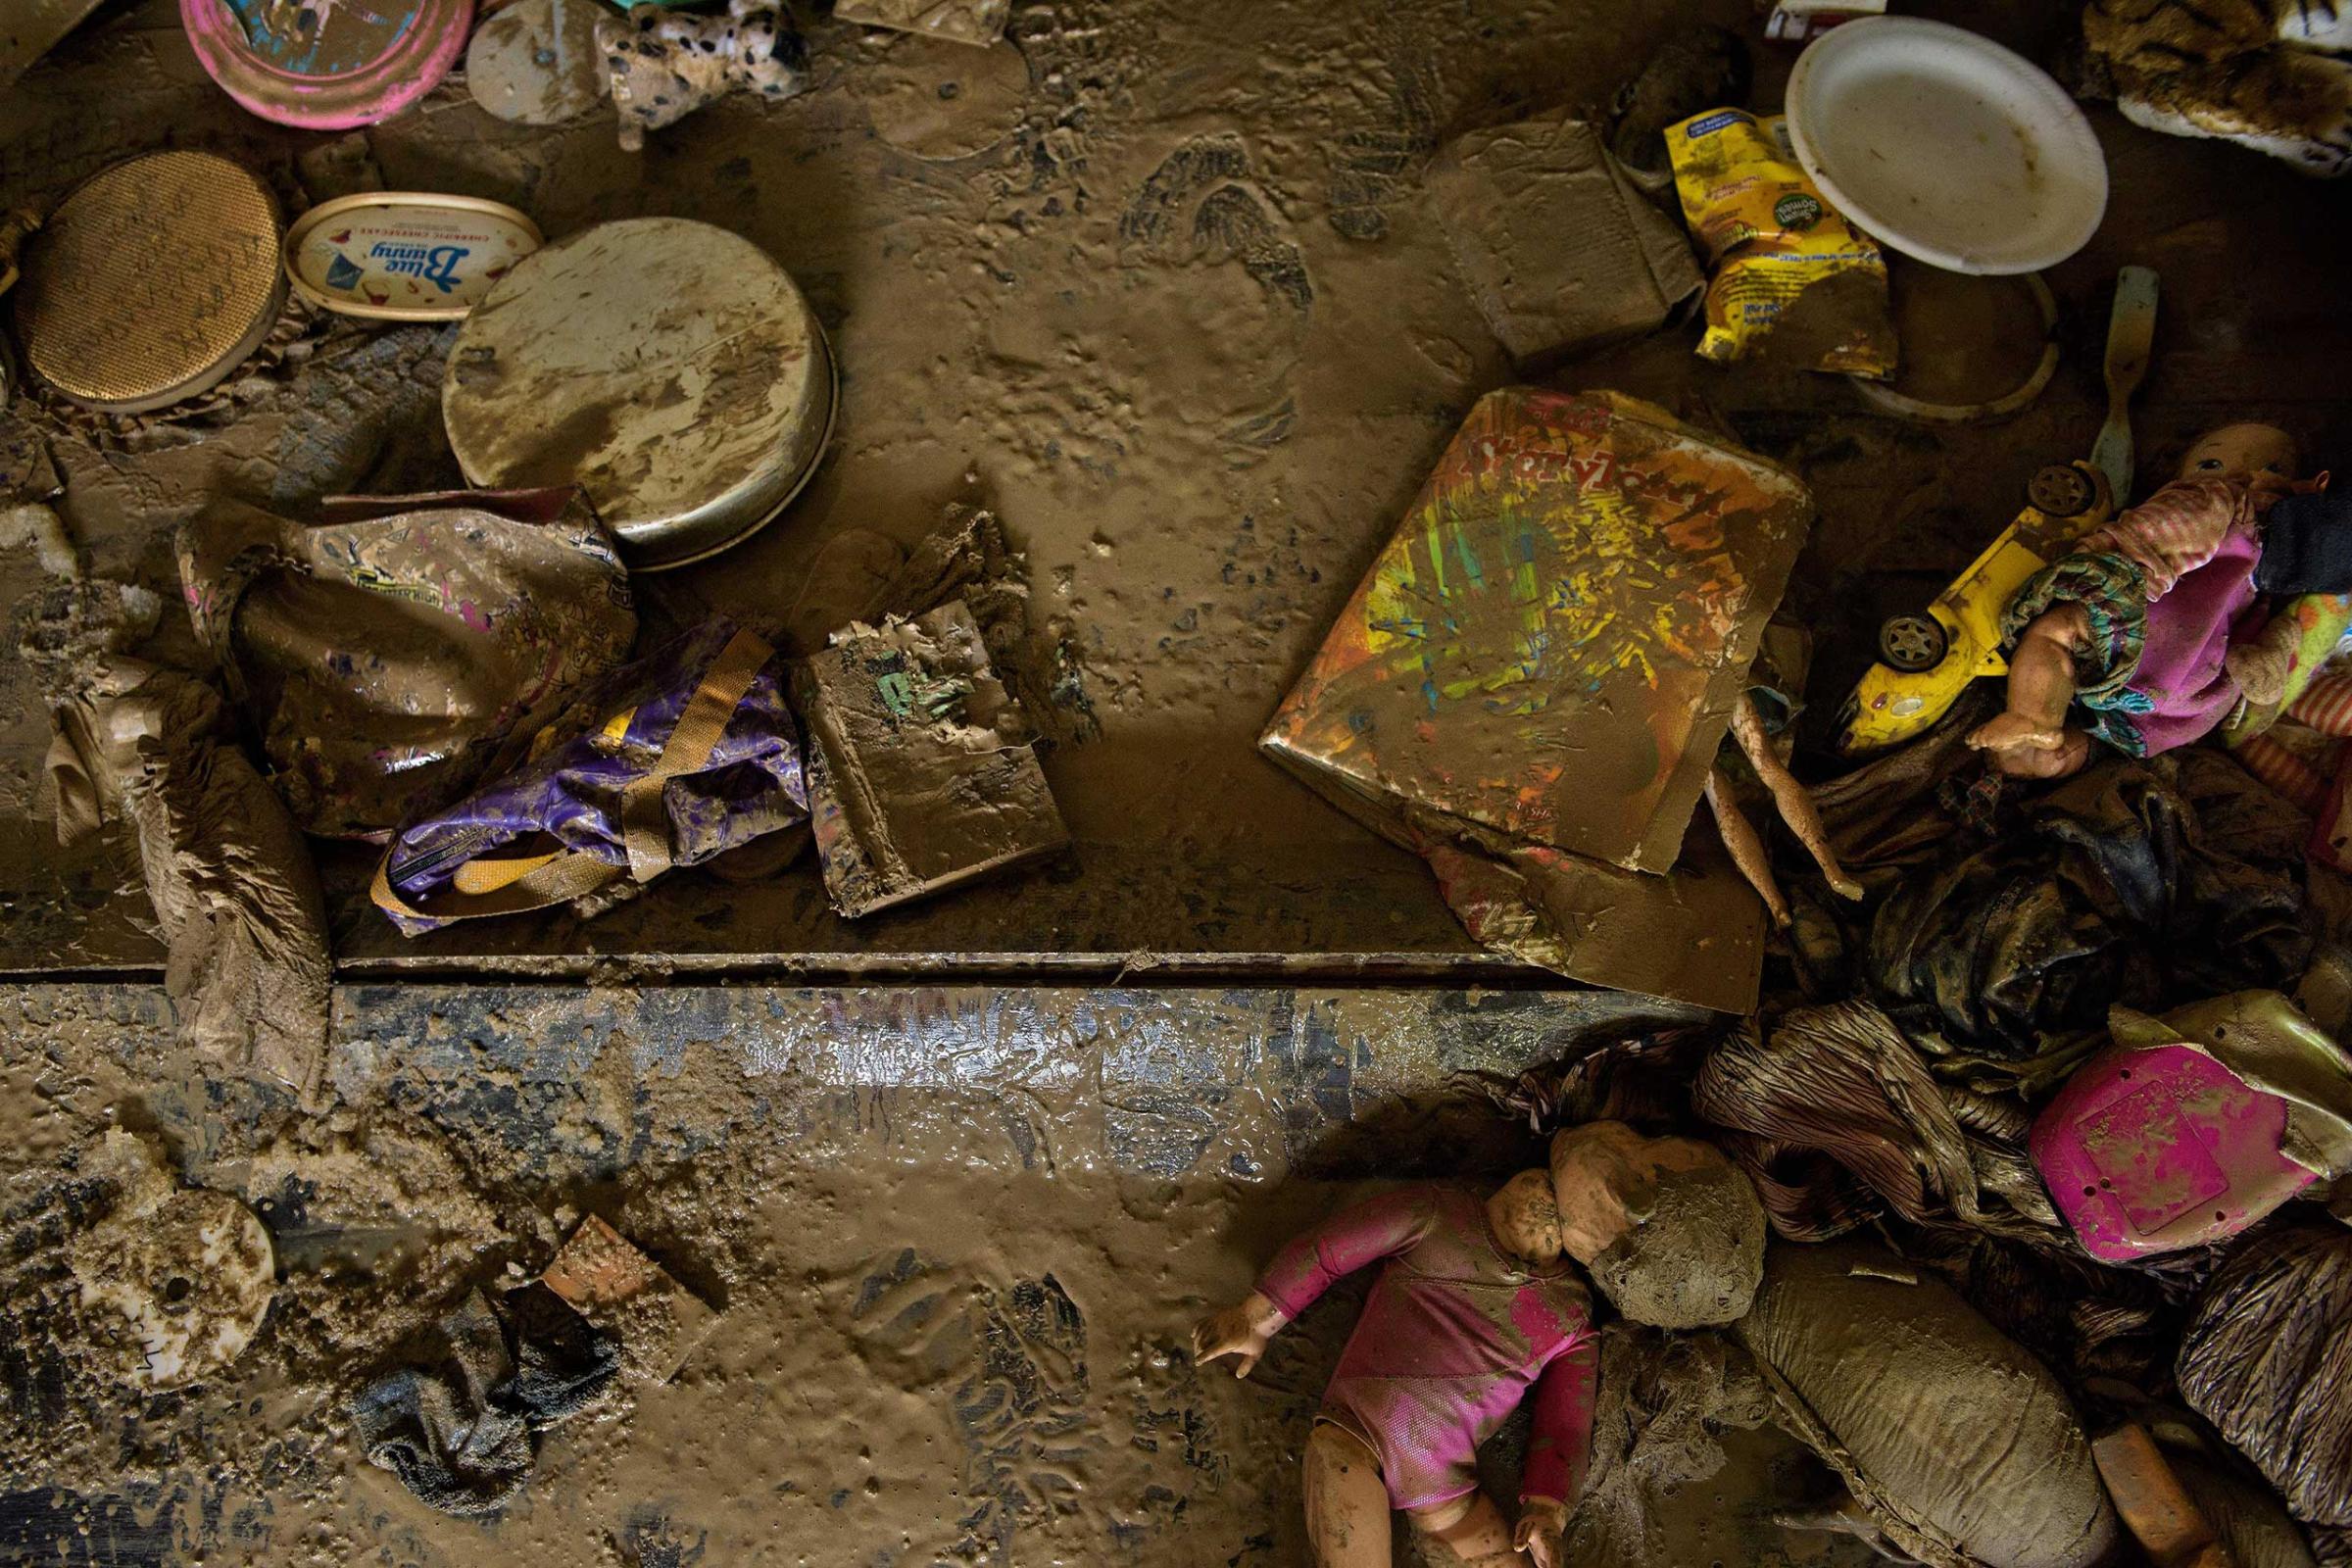 Mud covered belongings are seen on the floor of a home after floodwater receded in Denham Springs, La., on Aug. 17, 2016.